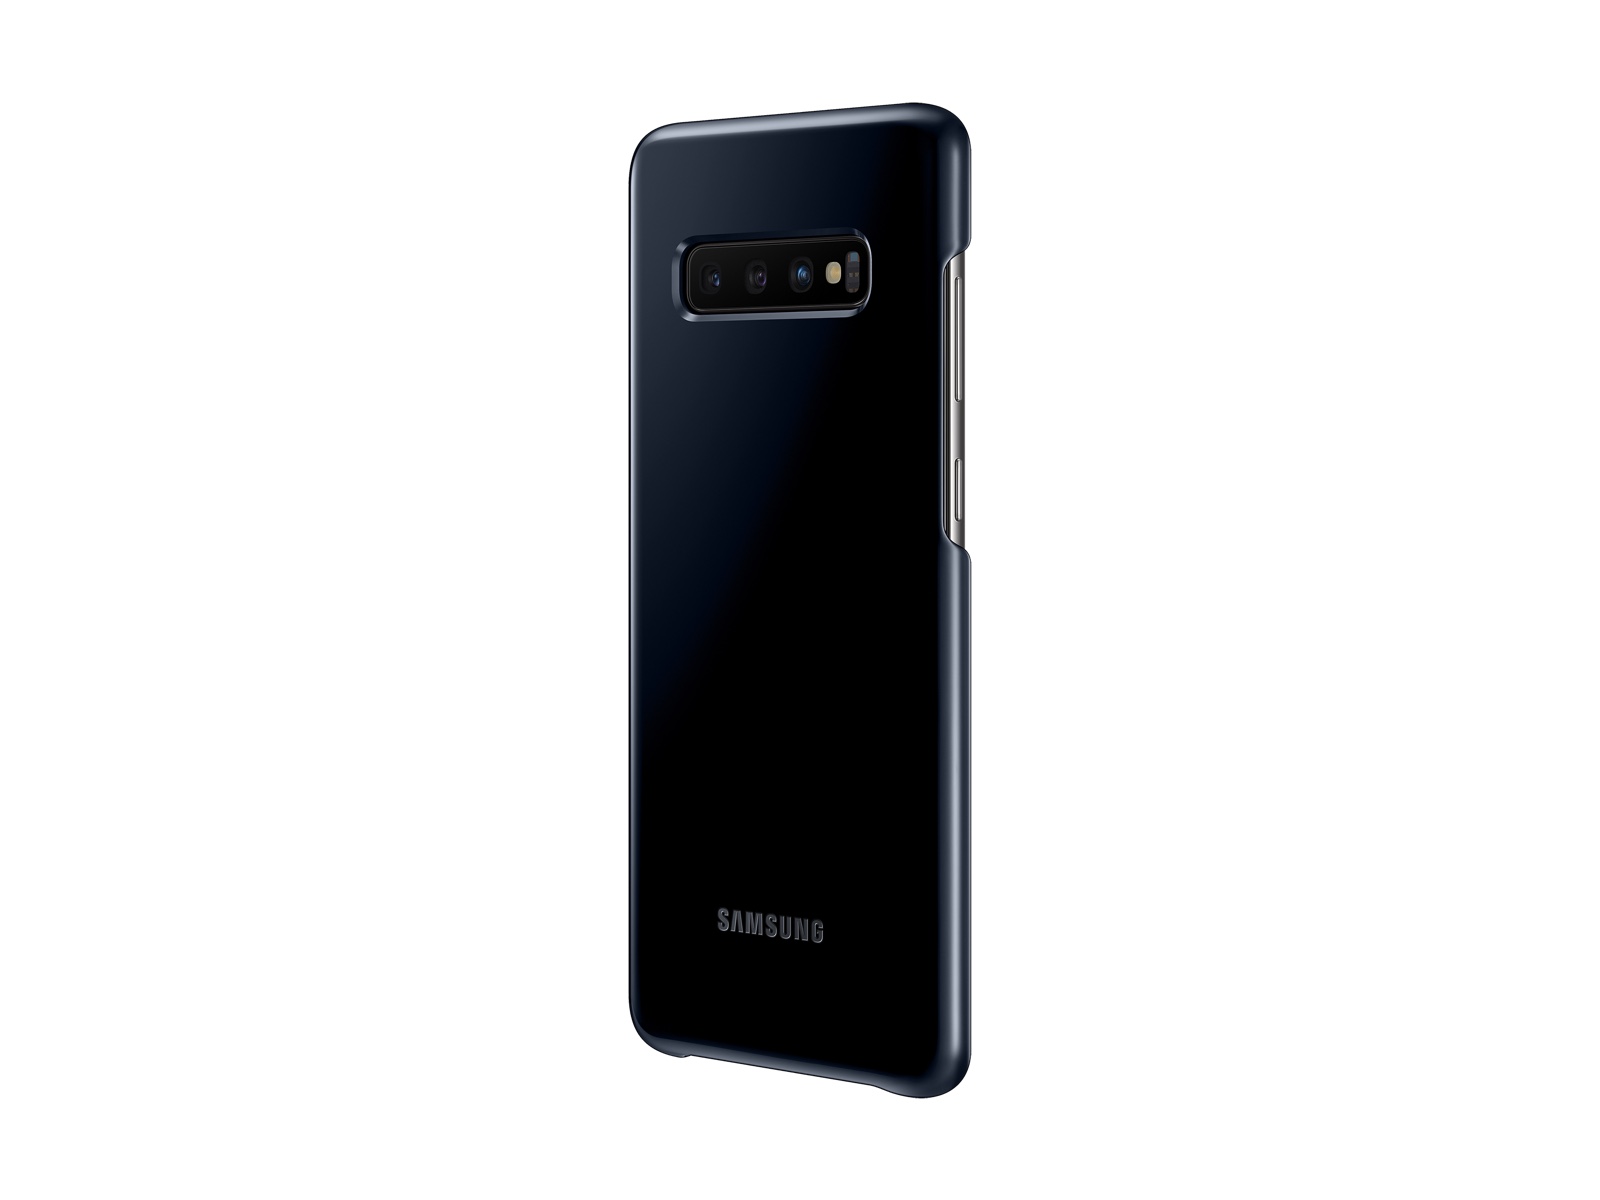 Galaxy S10+ LED Back Cover, Mobile Accessories - EF-KG975CBEGUS | Samsung US